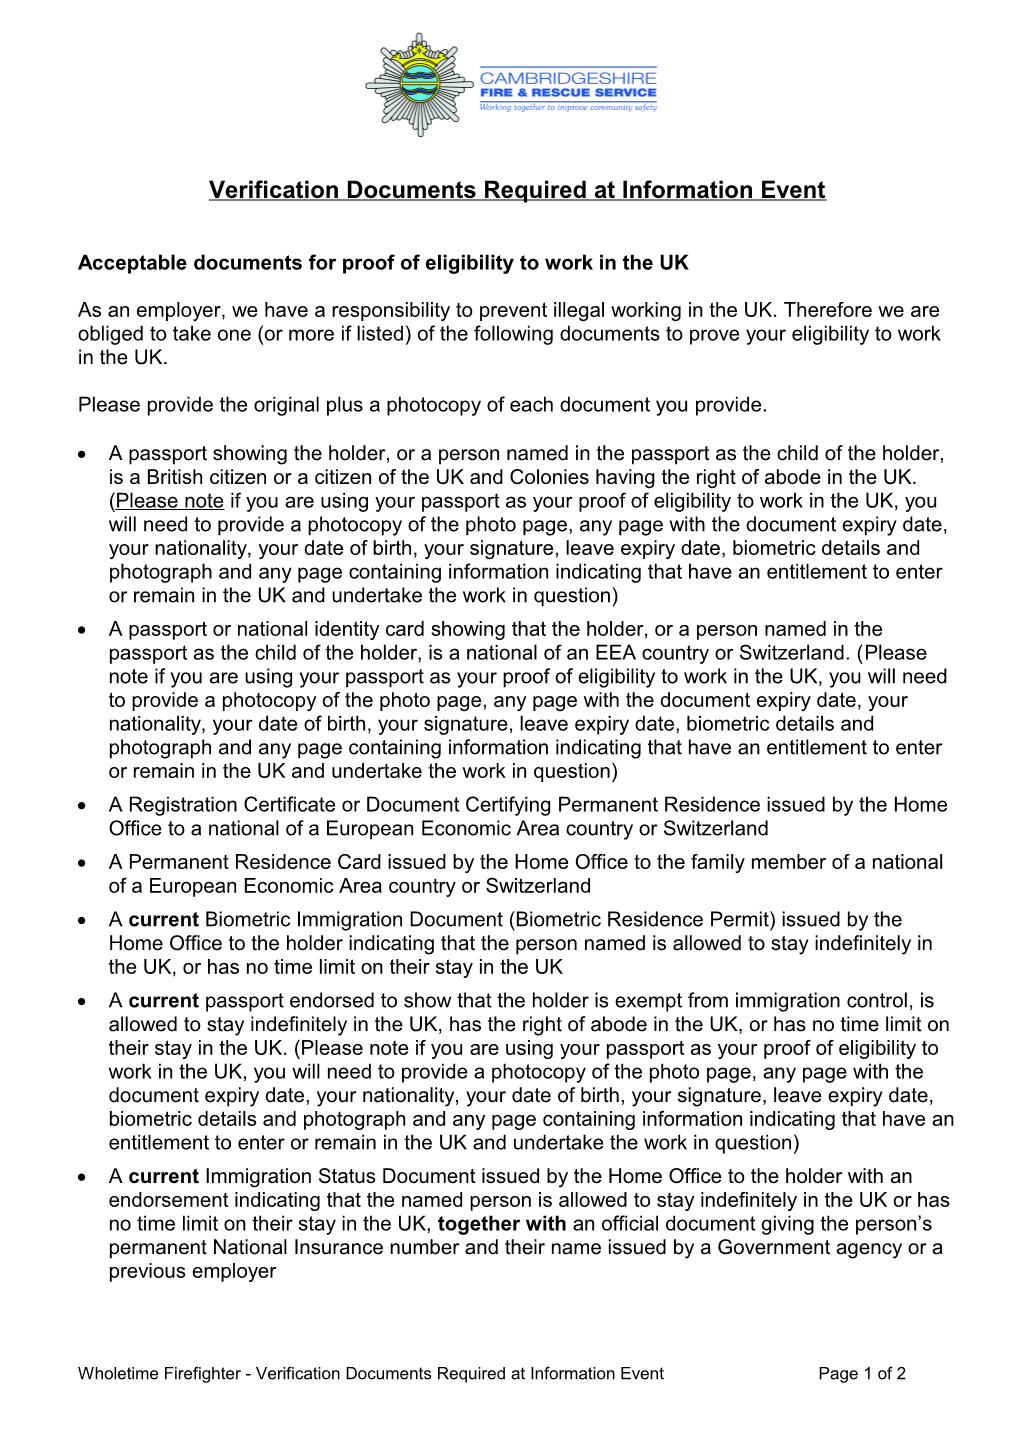 Acceptable Documents As Proof of Eligibility to Work in the Uk